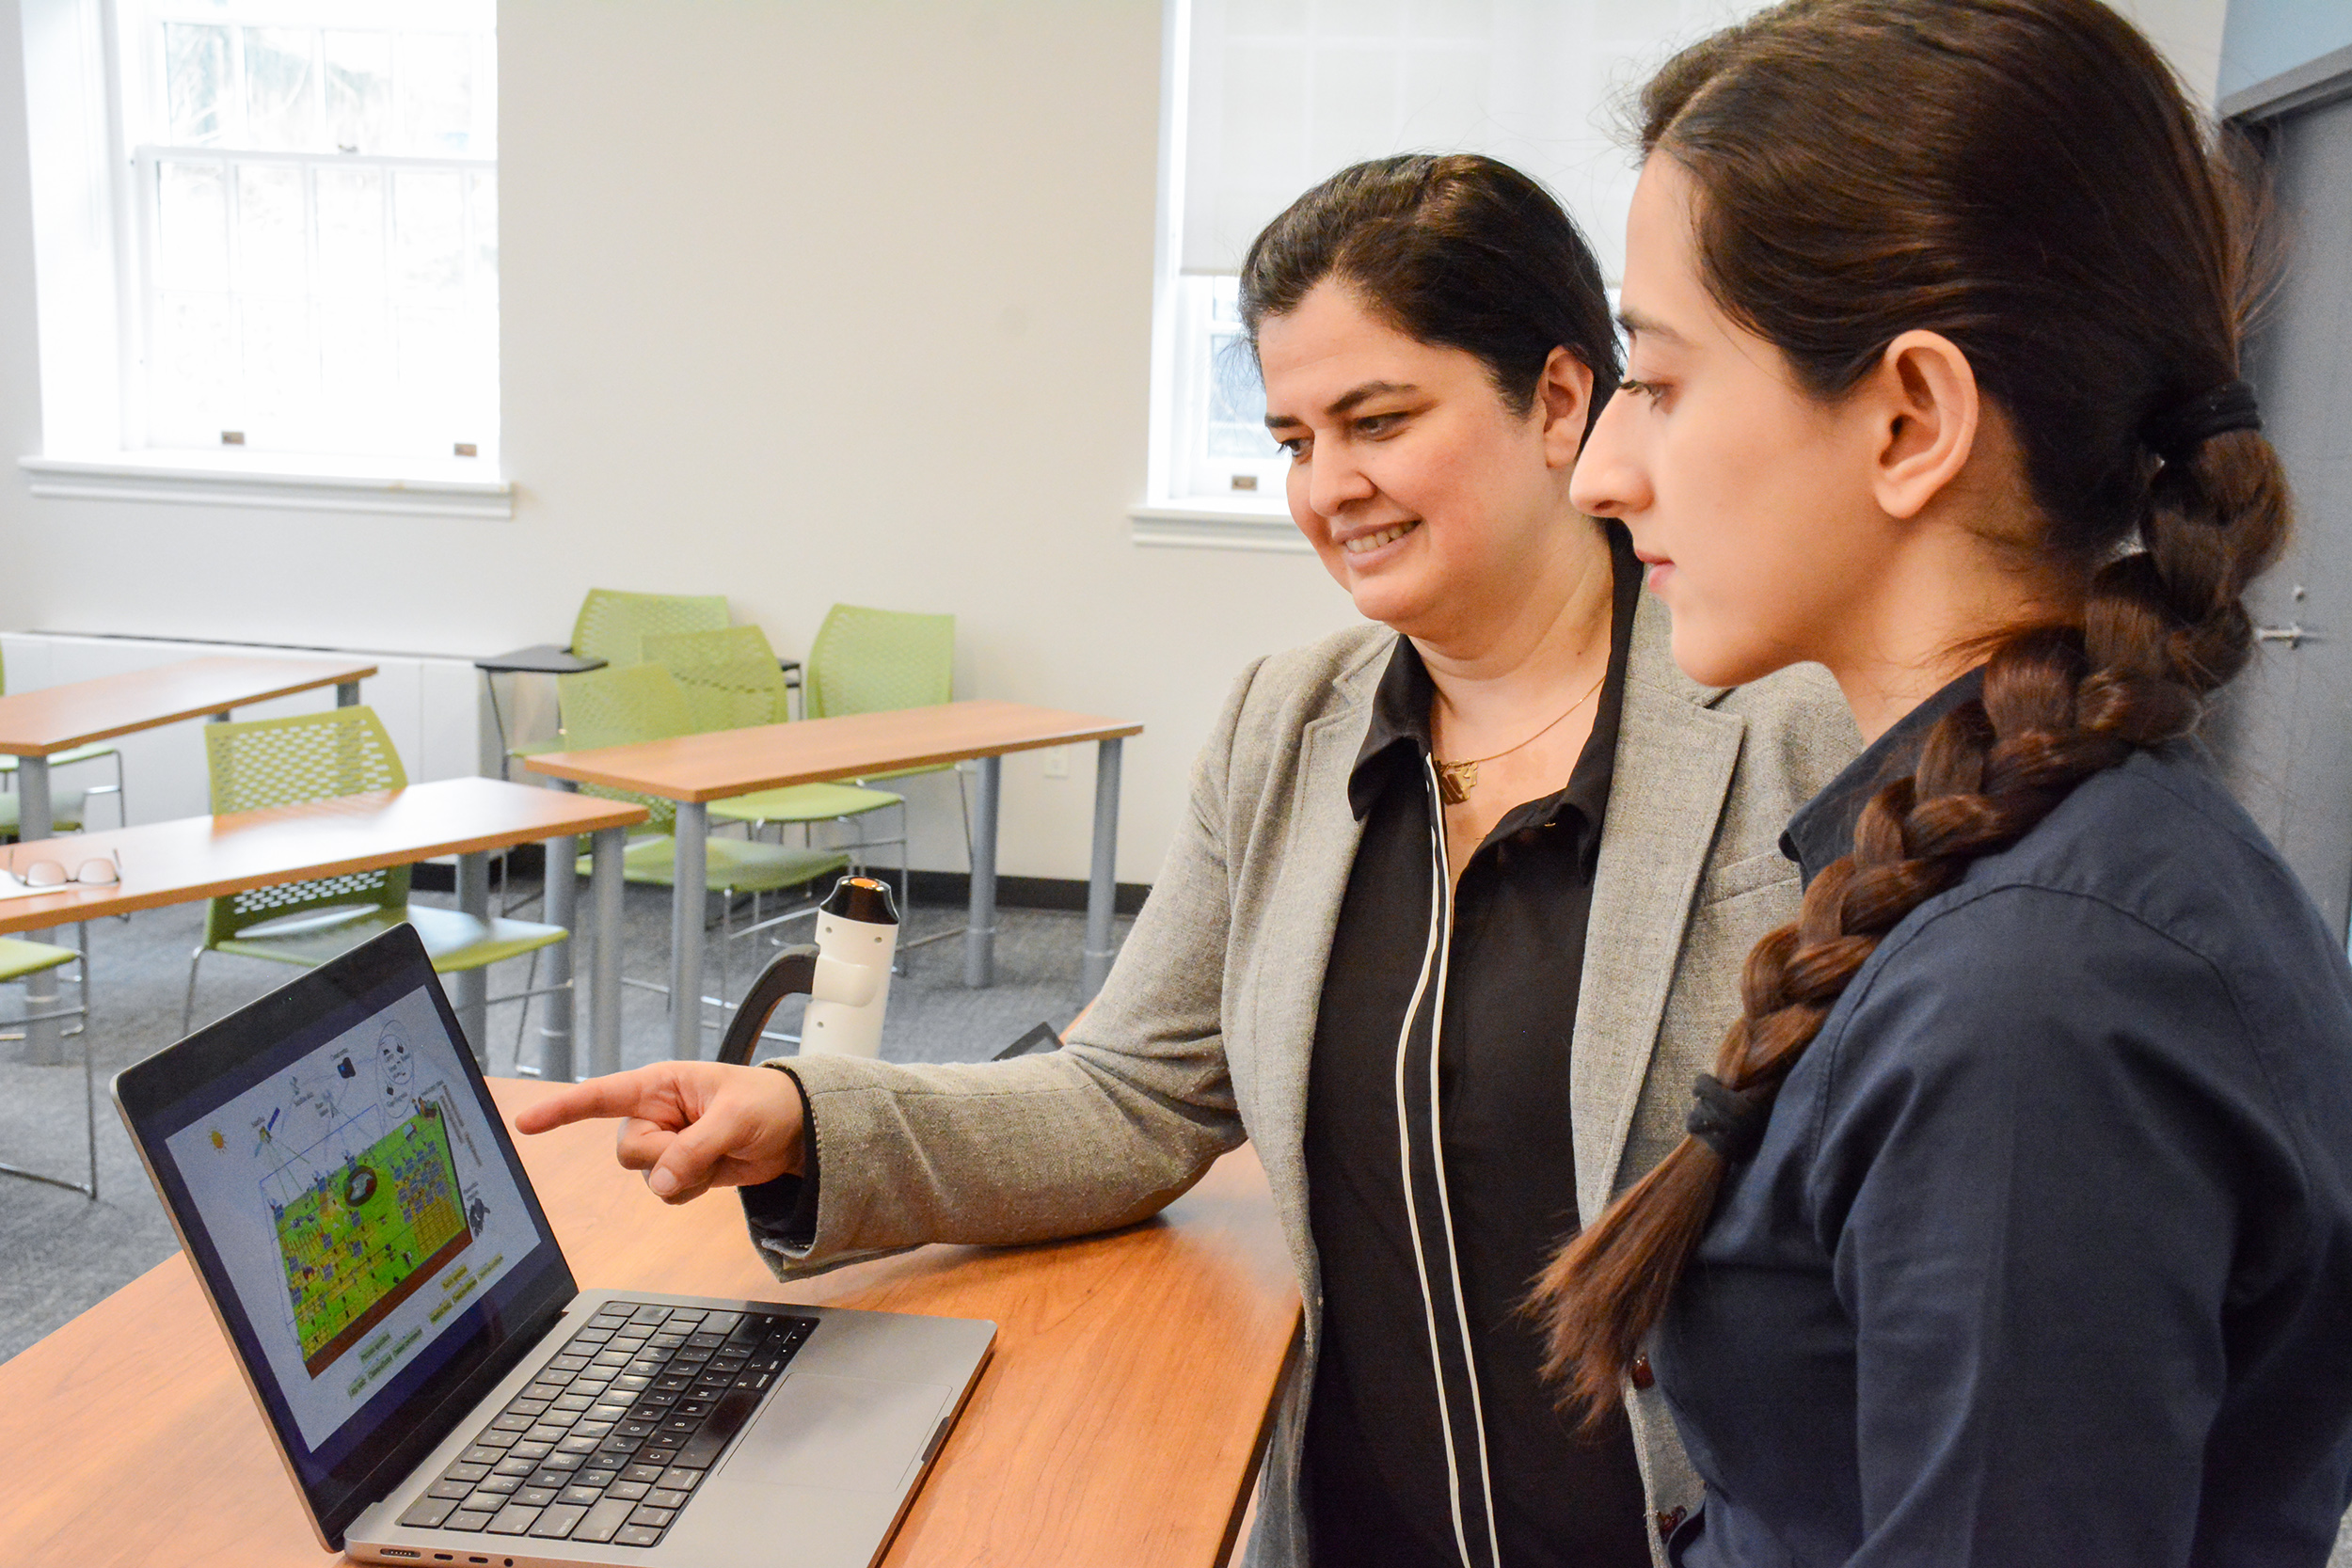 Dr Rozita Dara, left, showing a student content on a laptop in a classroom.